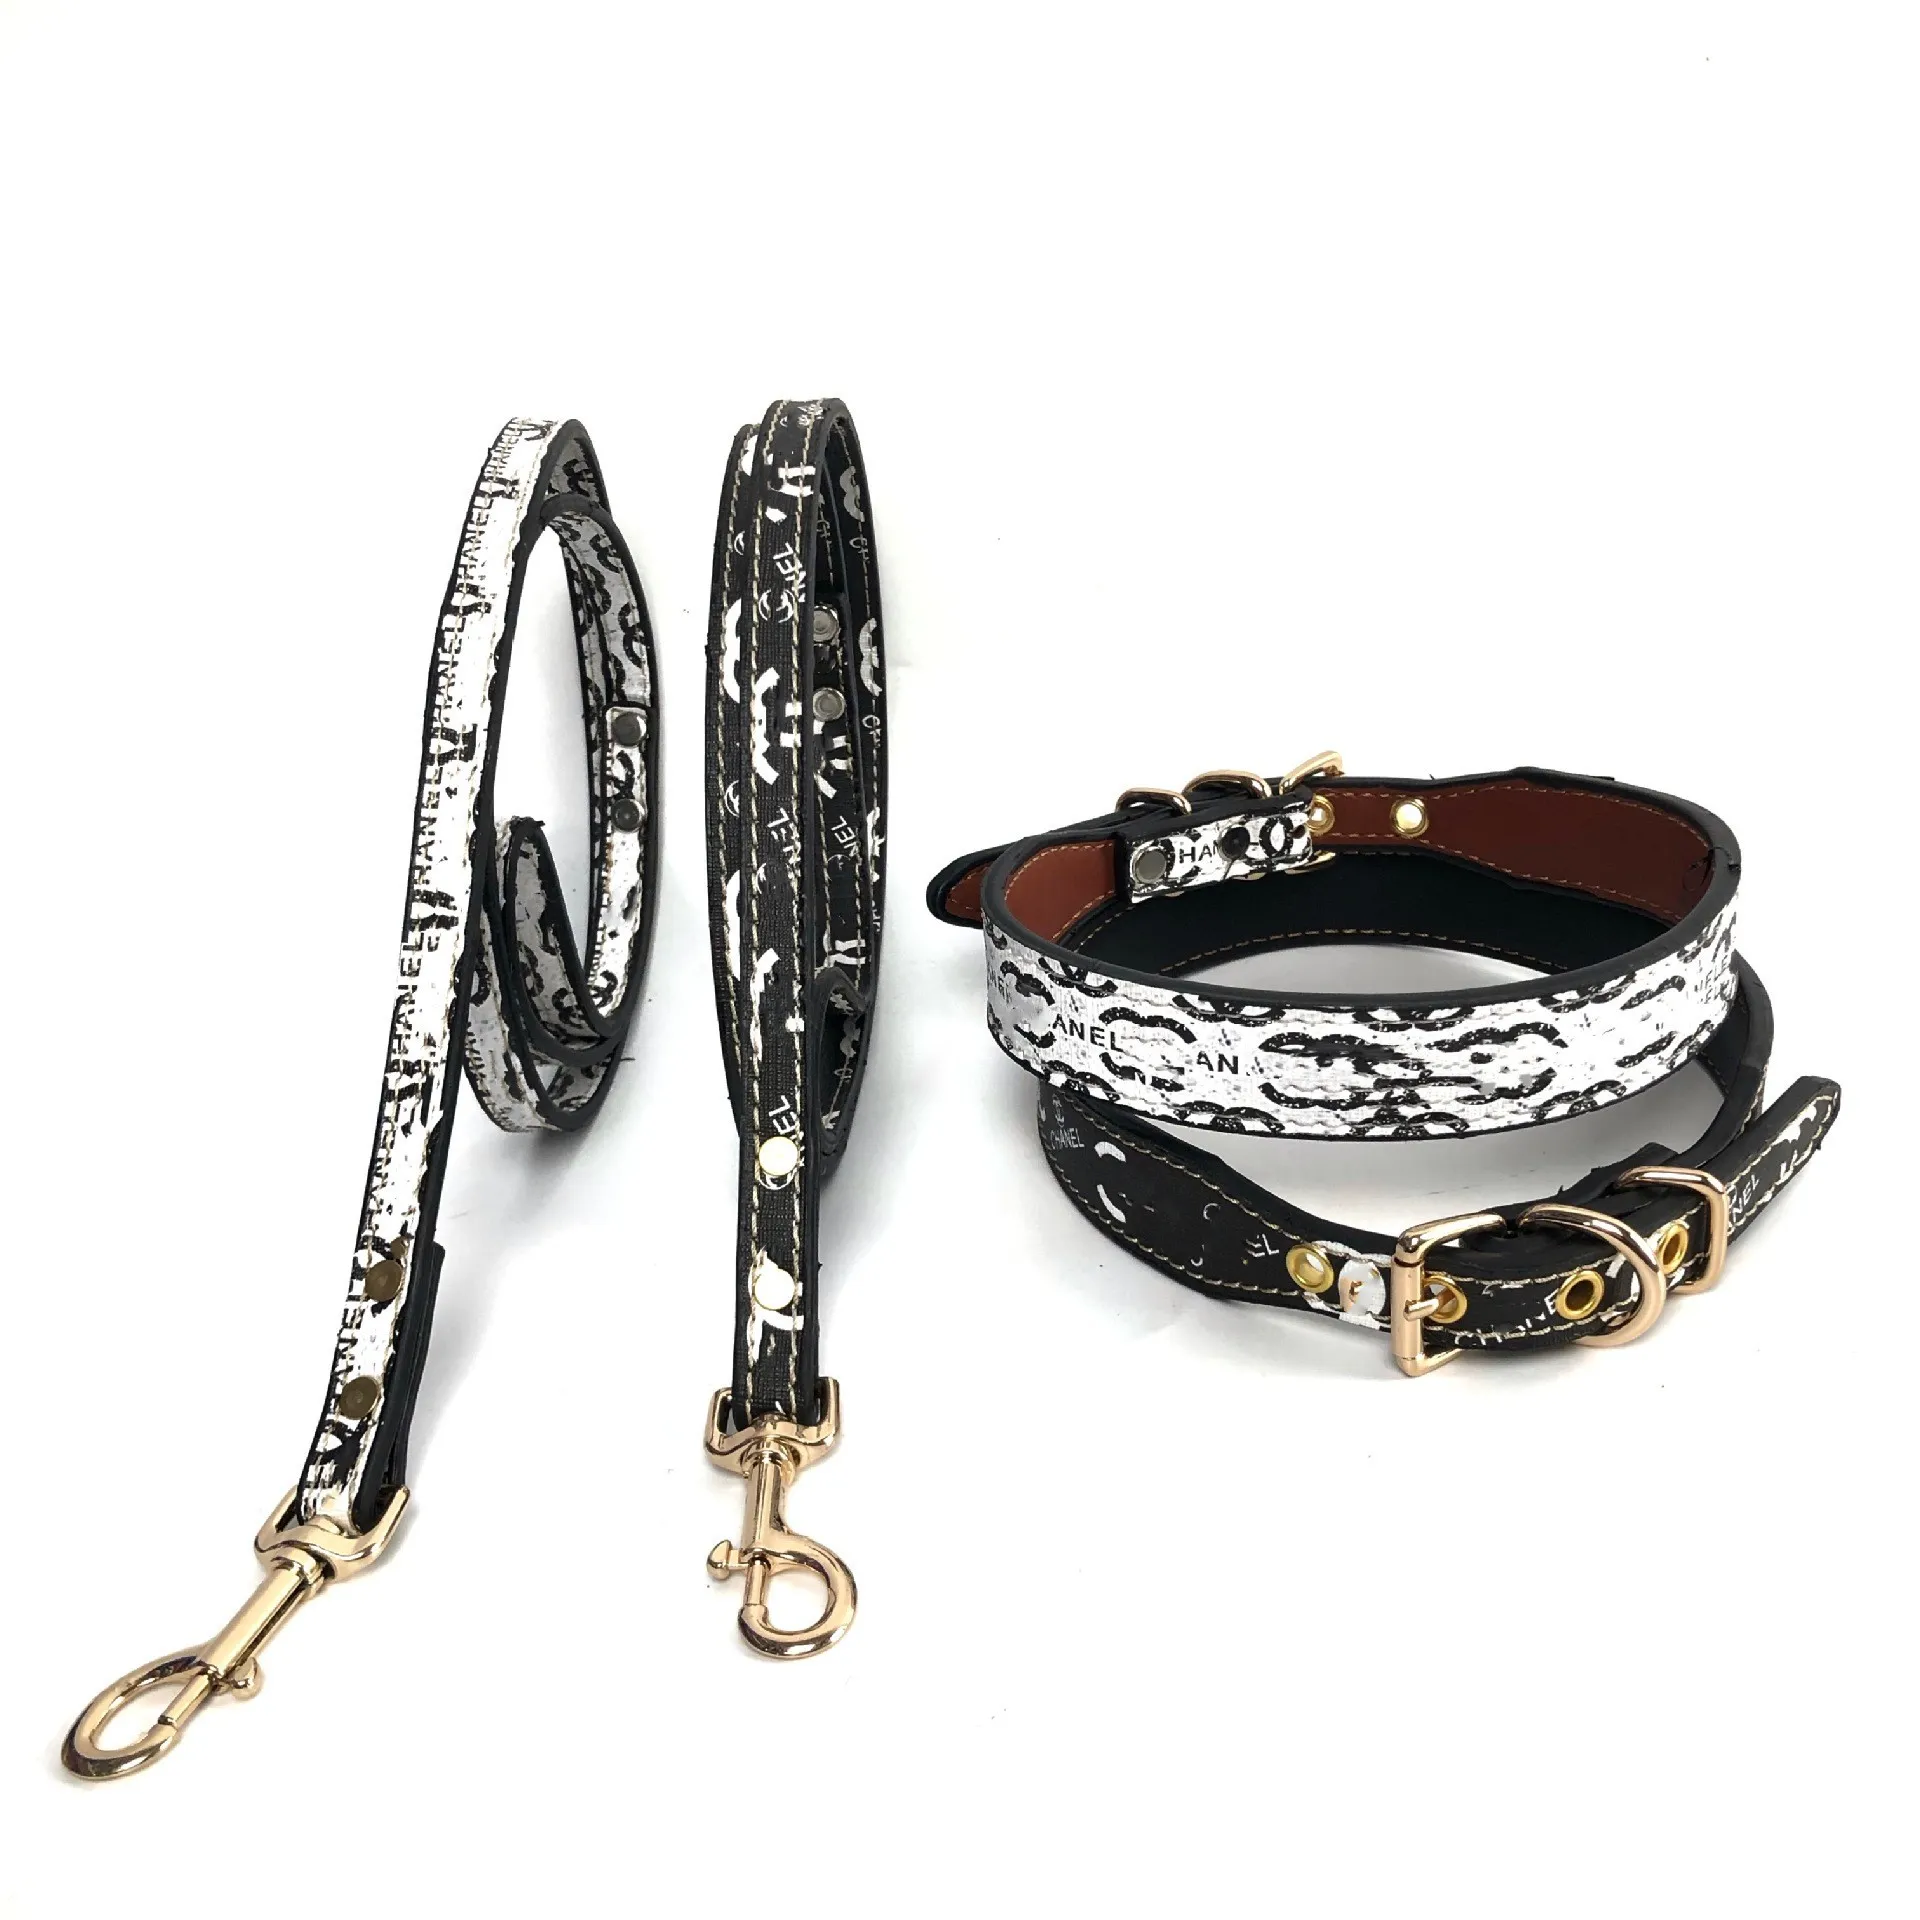 Designer dog collar traction rope black and white classic logo print leather dog cat pet Leashes collar Adjustable collar luxury dog walking tool